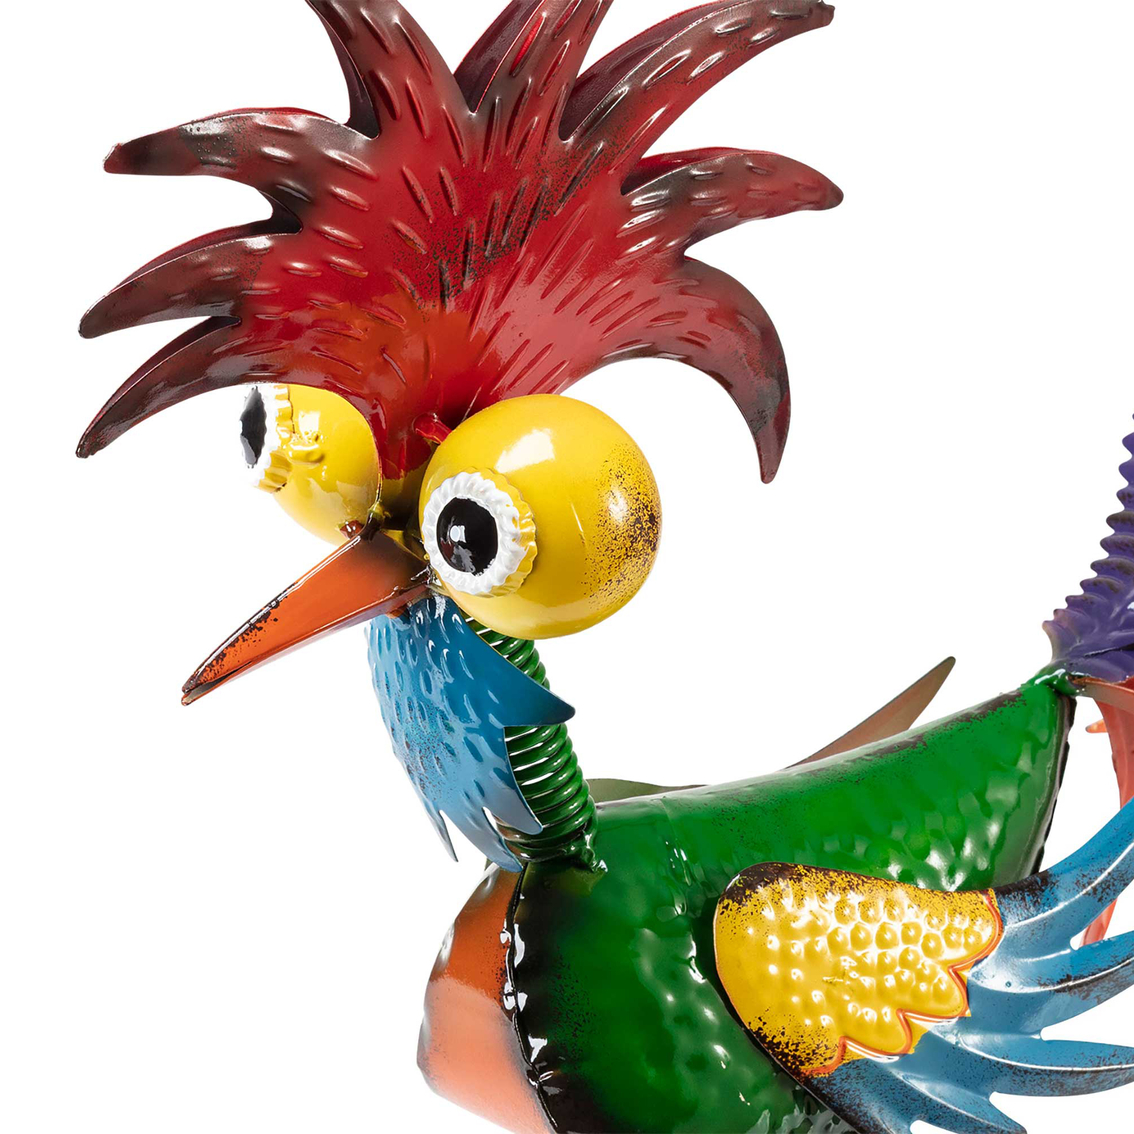 Alpine Wacky Tropical Metal Rooster Decor - Image 5 of 6